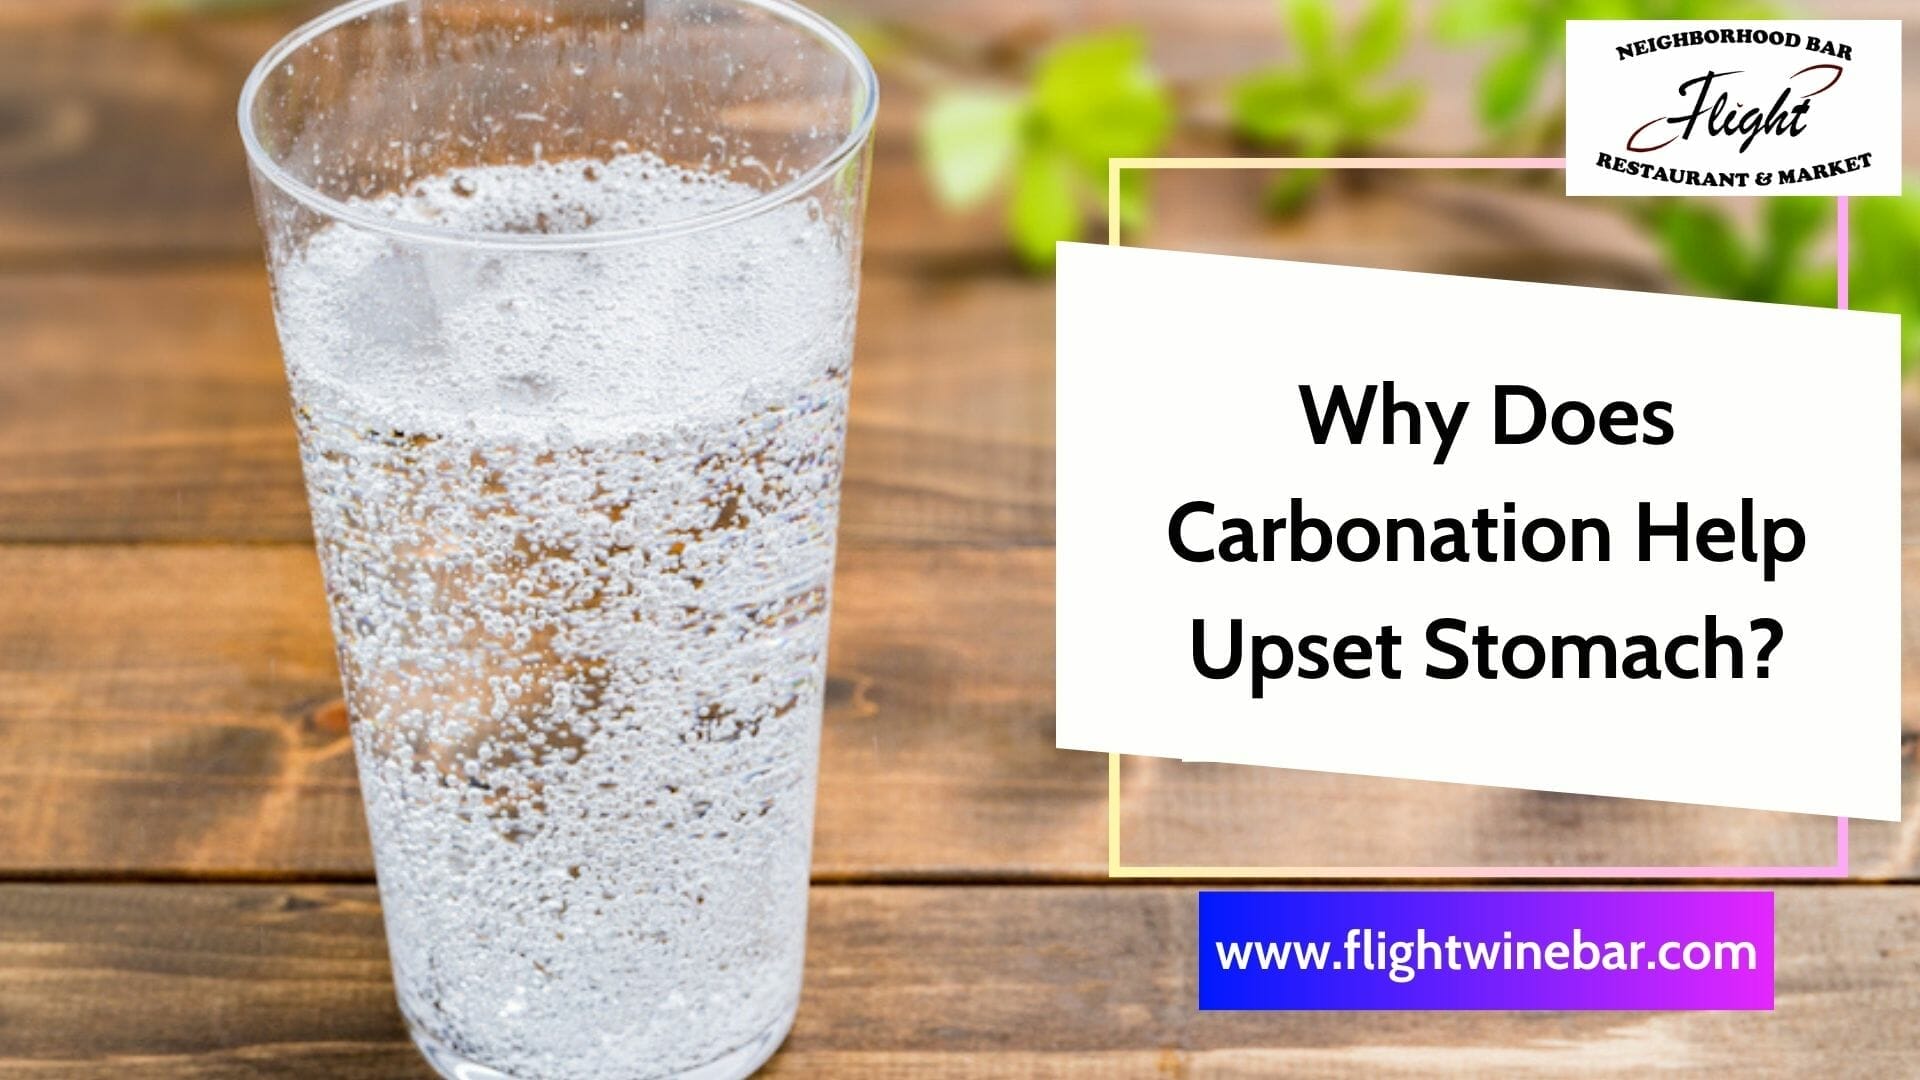 Why Does Carbonation Help Upset Stomach